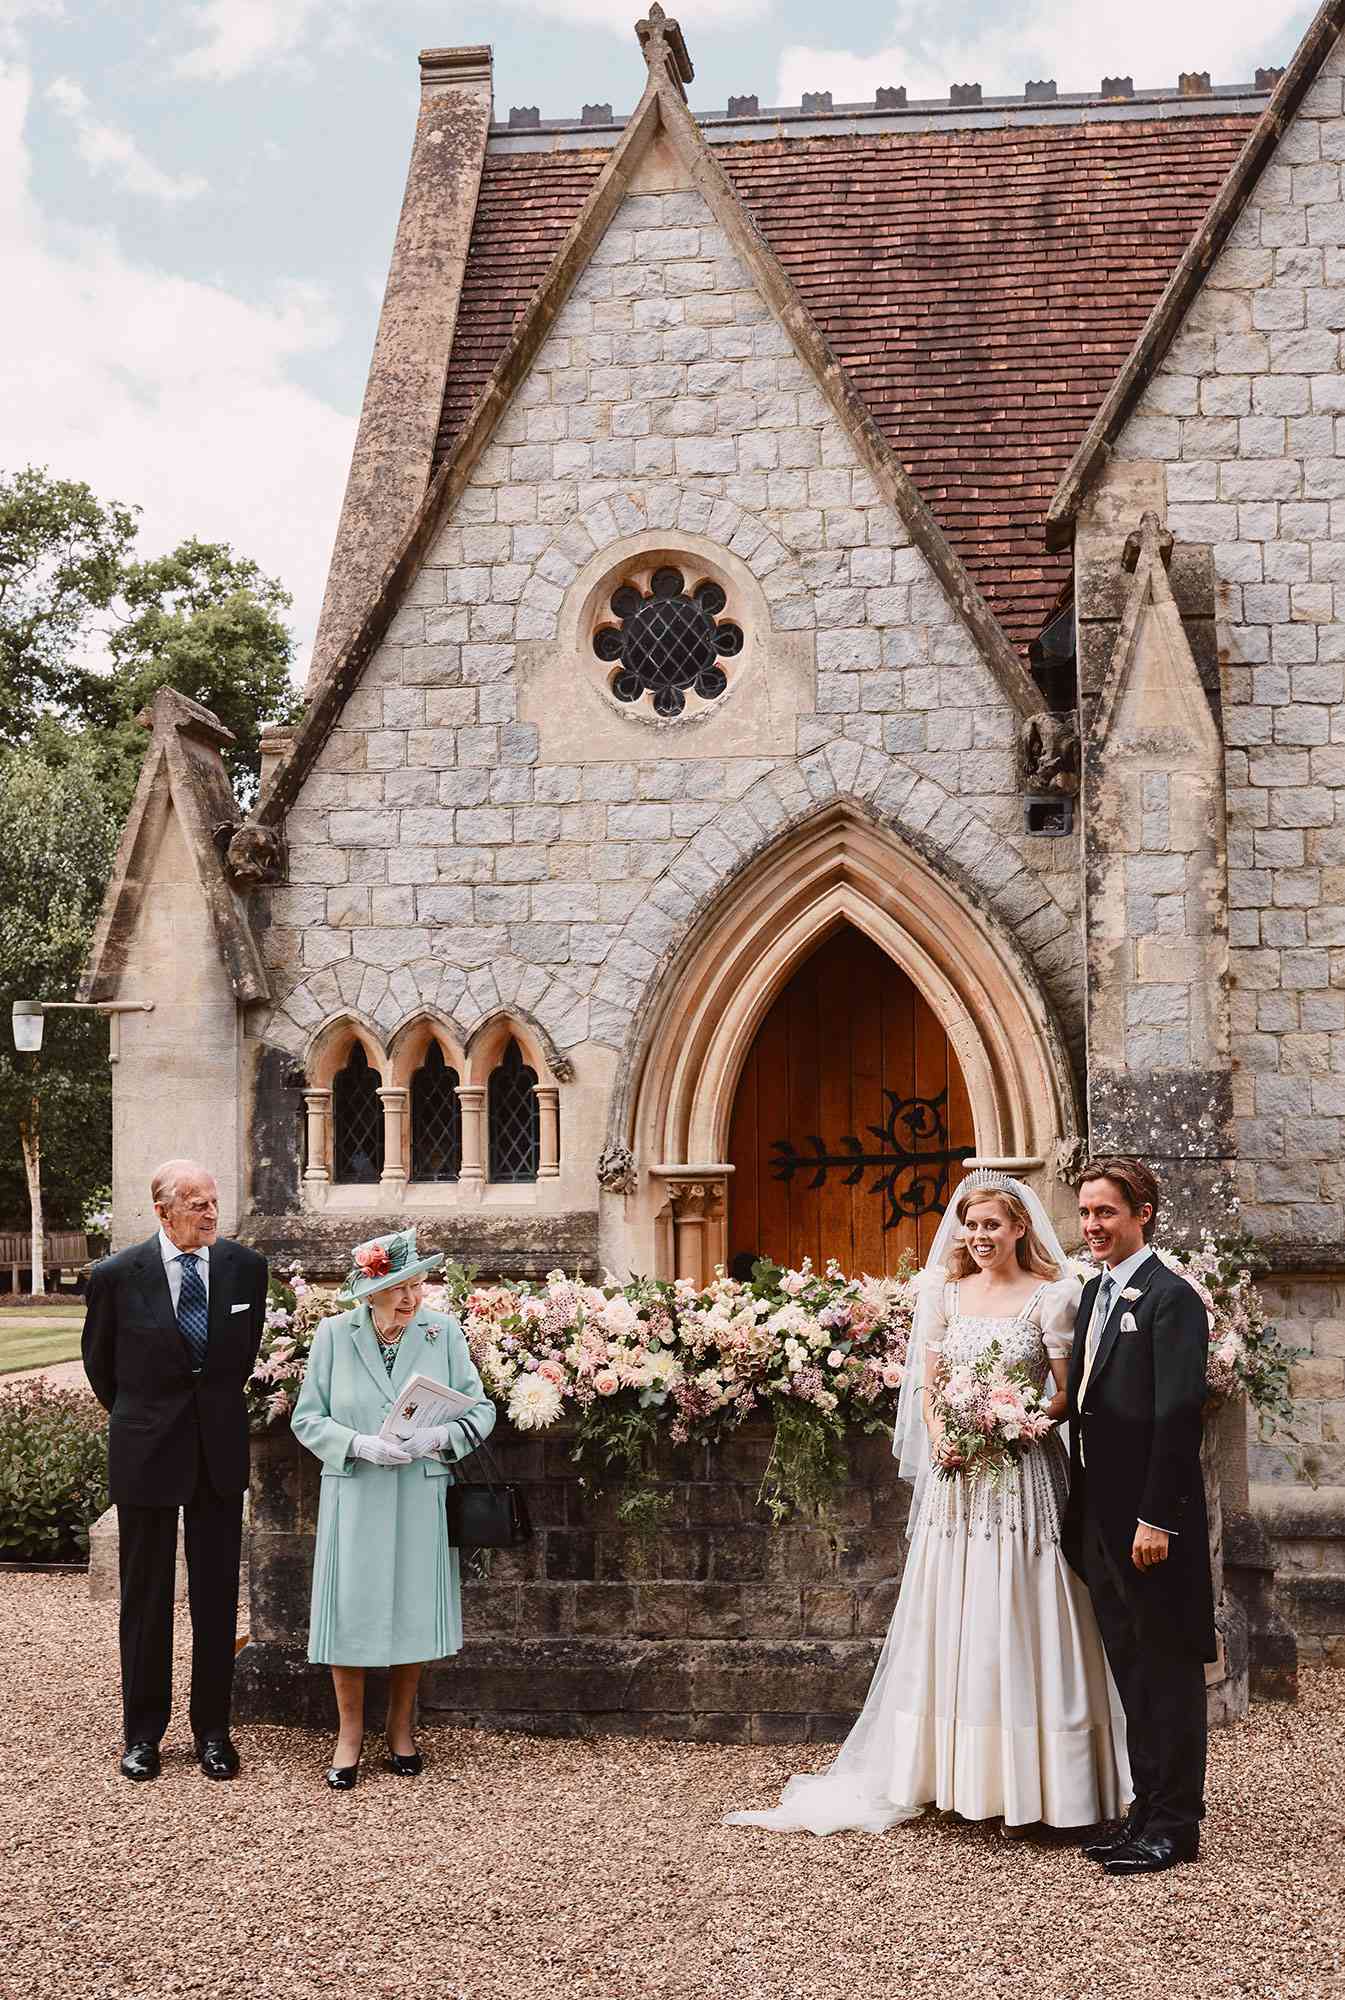 Embargoed: Not for publication or onward transmission before 2200 BST Saturday July 18, 2020. Princess Beatrice wedding